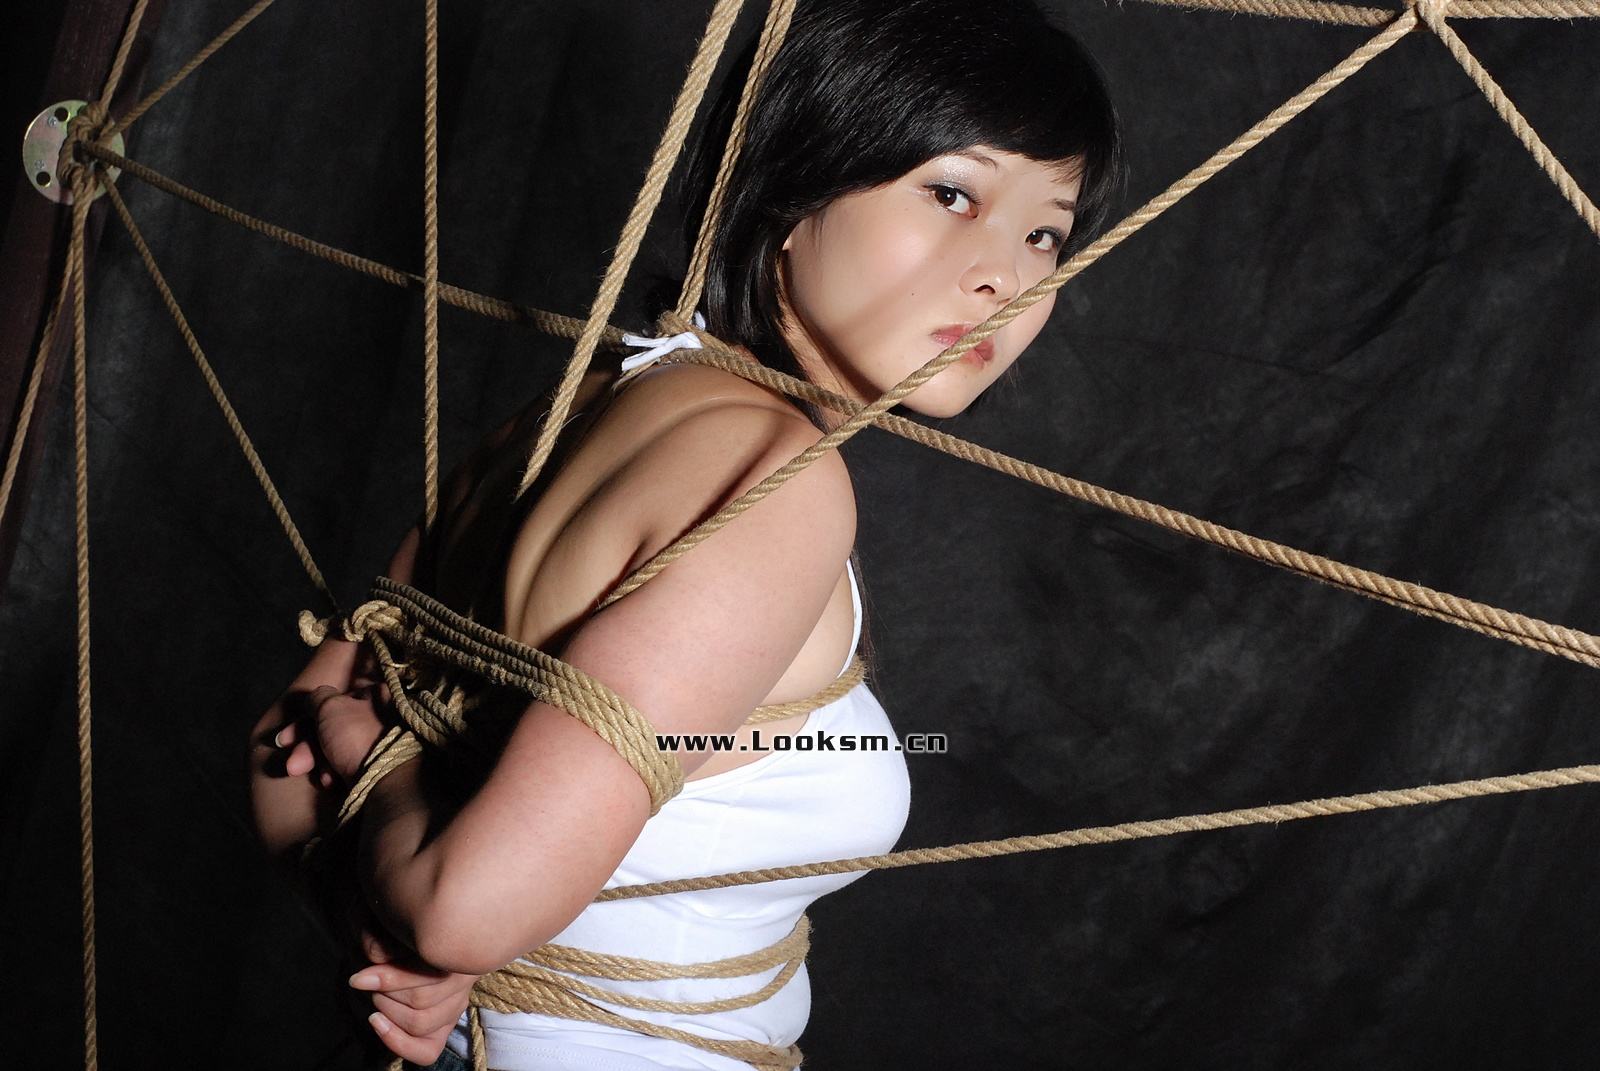 Chinese Rope Model 356